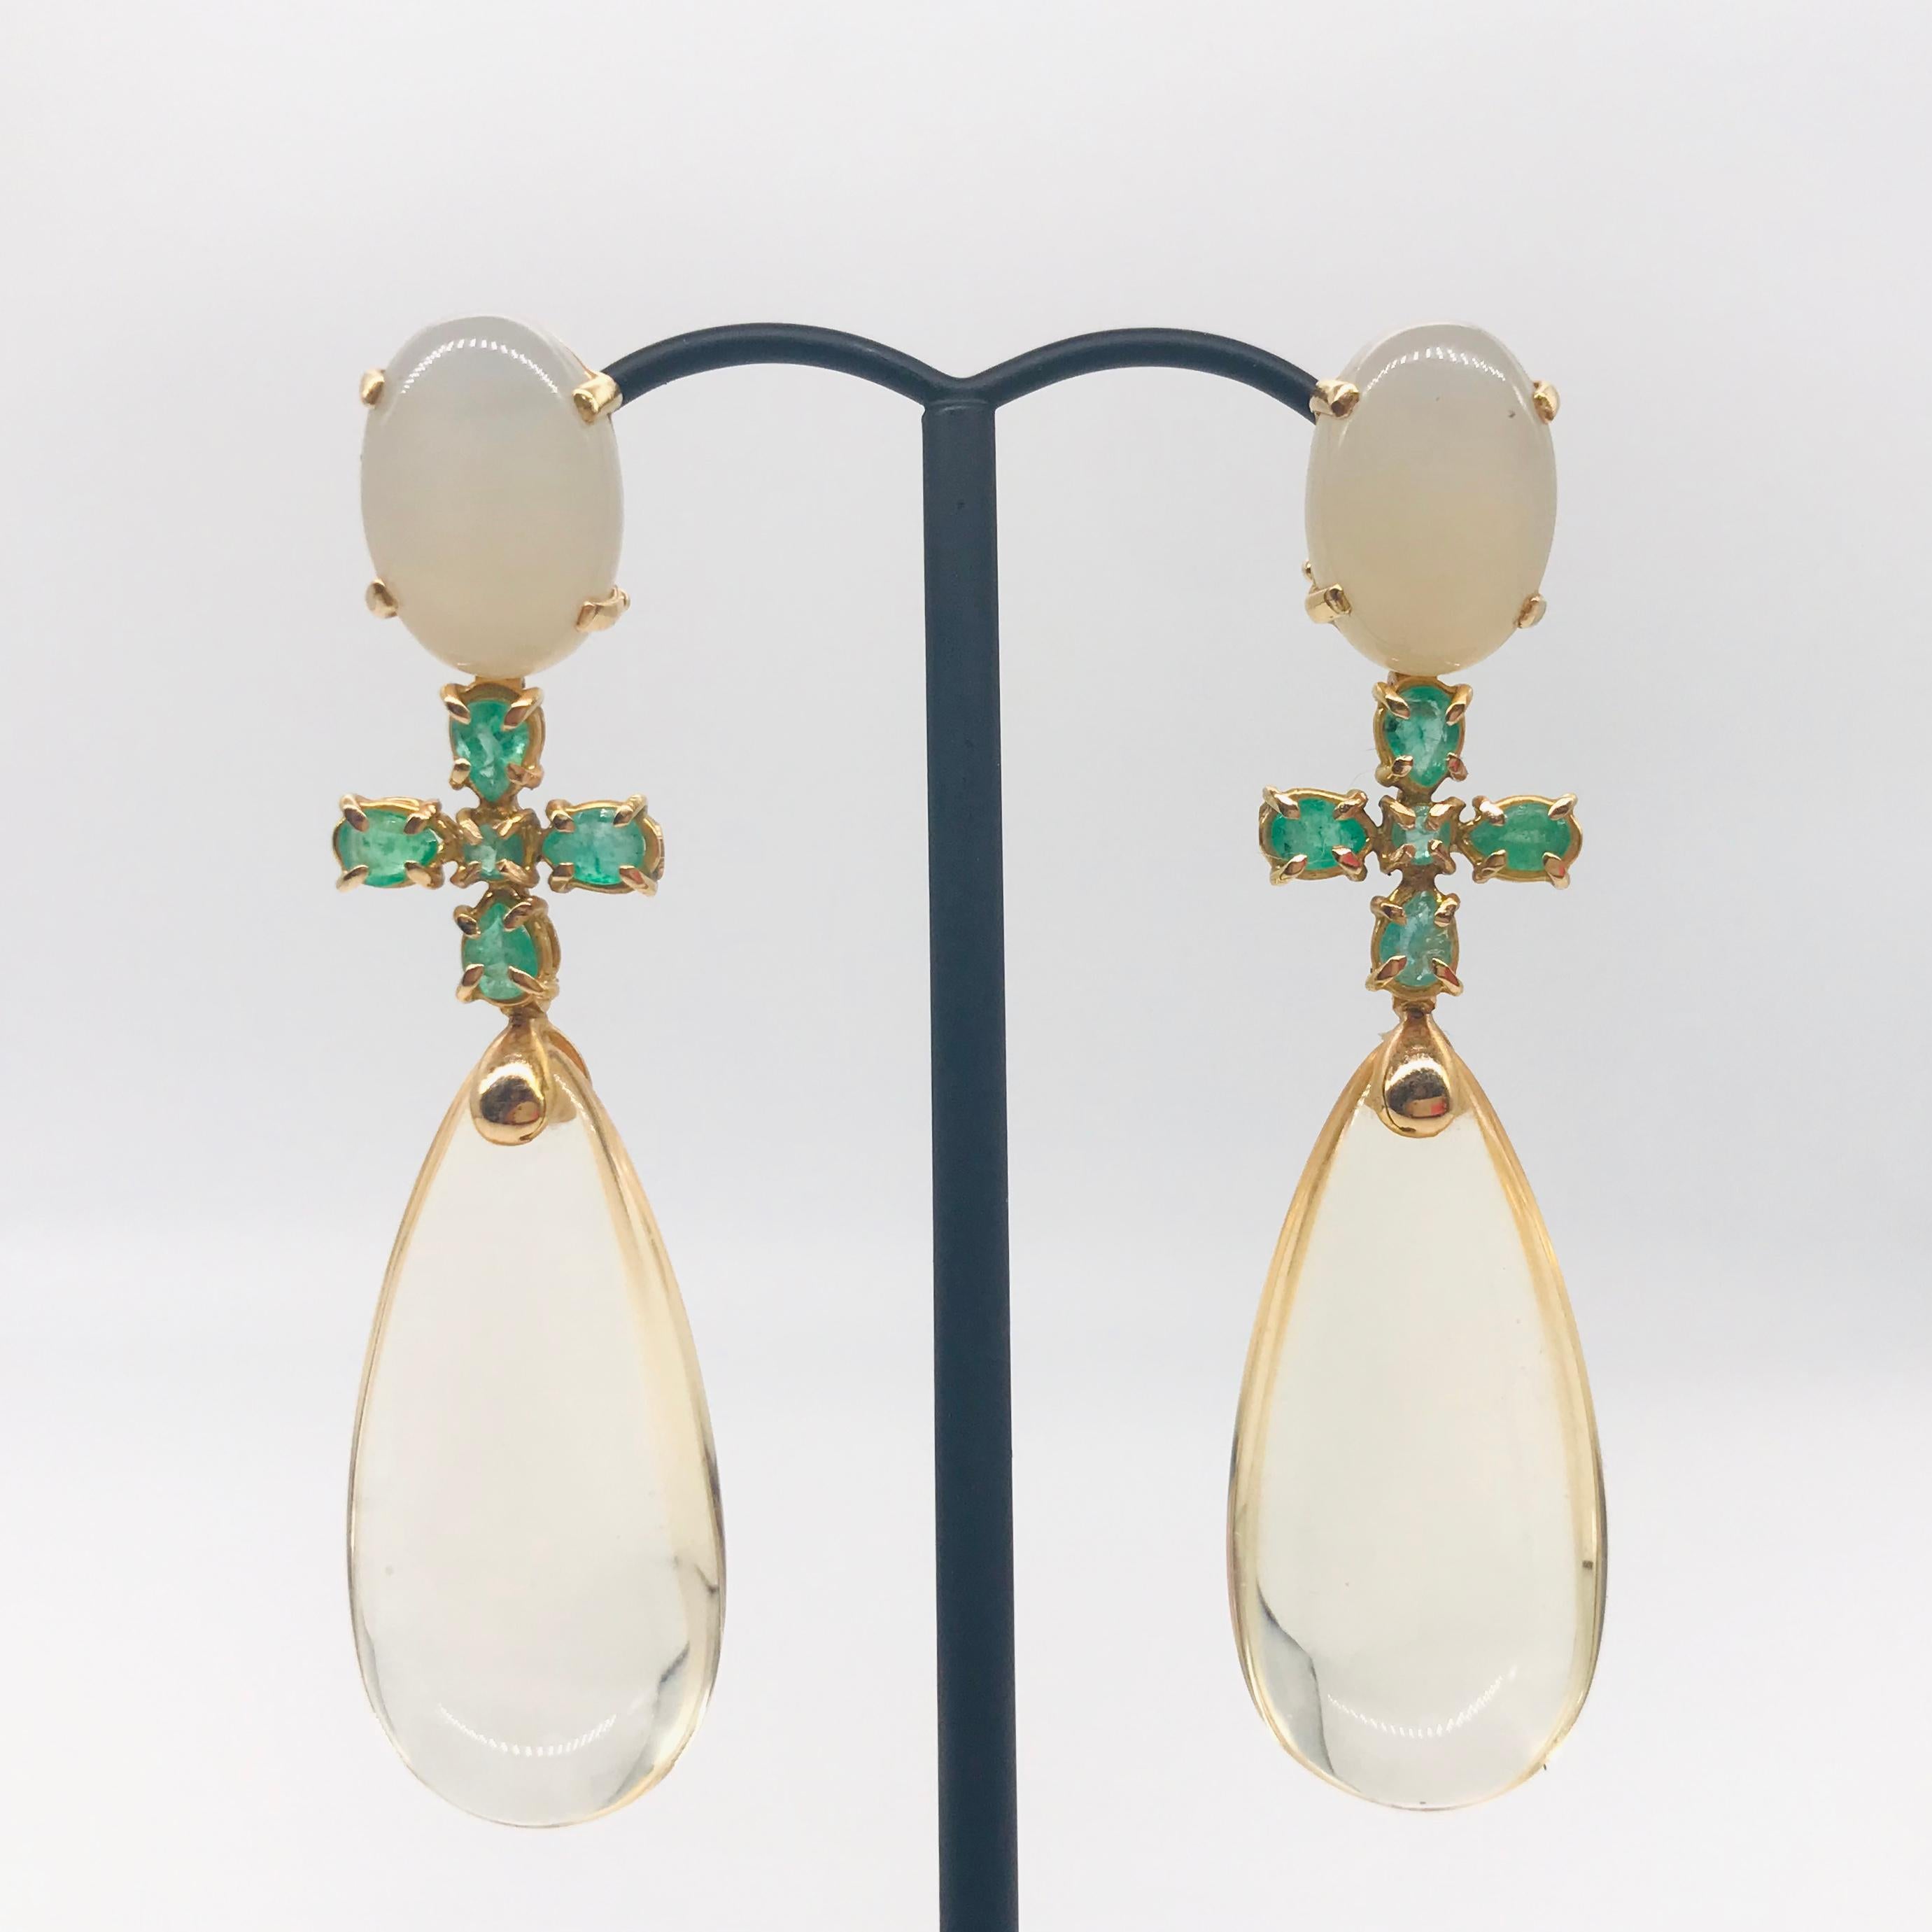 Moonstones, Hydro citrine and Emeralds on Yellow gold 18 k Chandelier Earrings 
2 Moonstones 
2 Hydro Citrine 
10 Emeralds 
Yellow Gold 18 k  weight of gold 5 Grams 
2 type of Clasp (clip and pic) 
Weight of Earrings / 19.20 grams